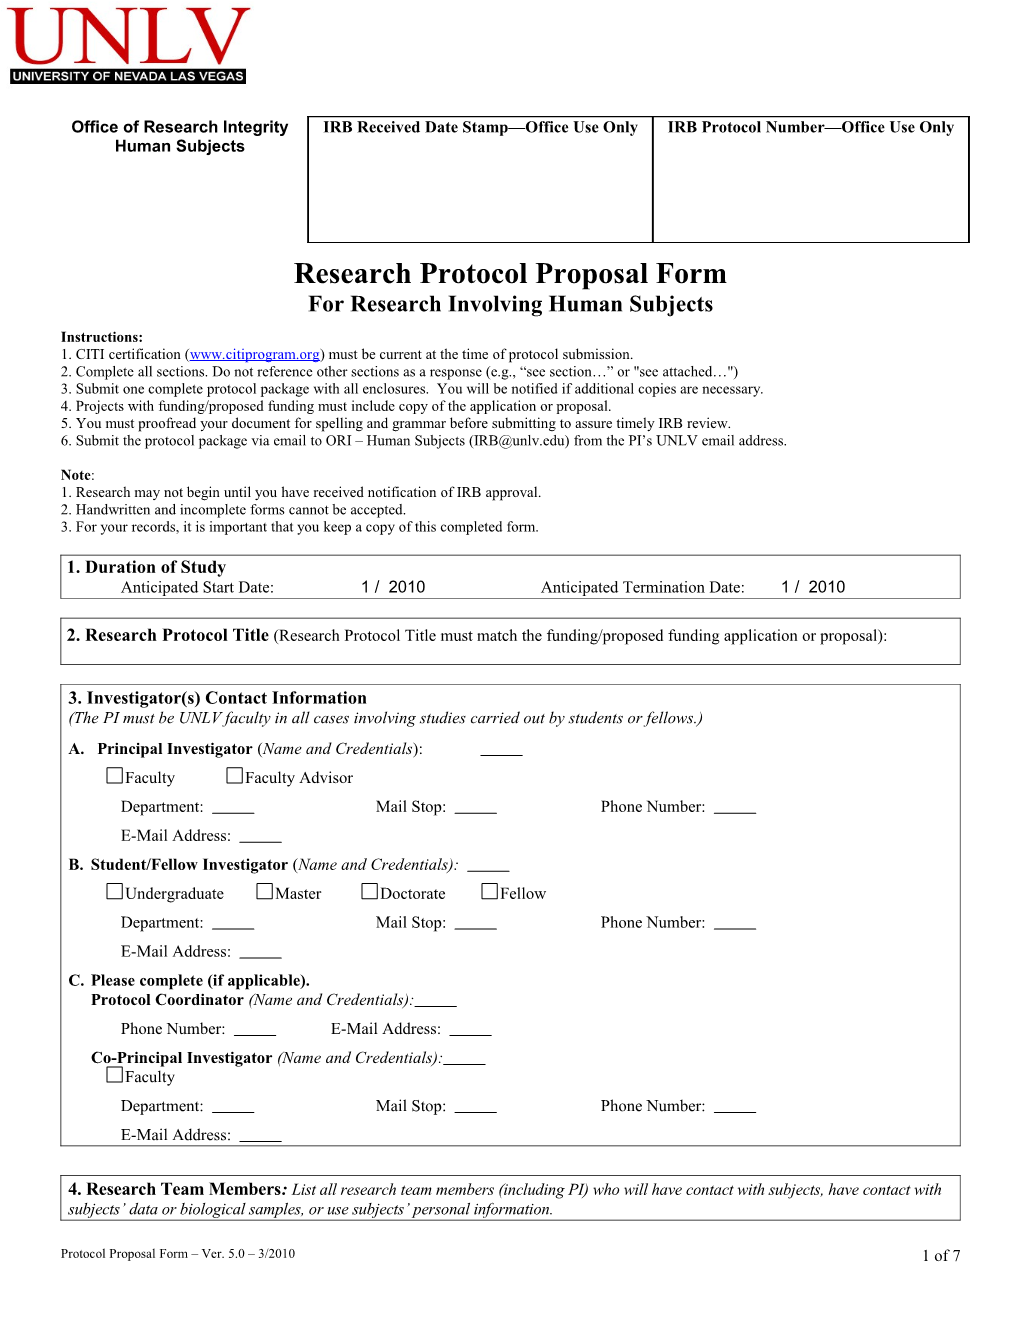 Research Protocol Proposal Form for Research Involving Human Subjects